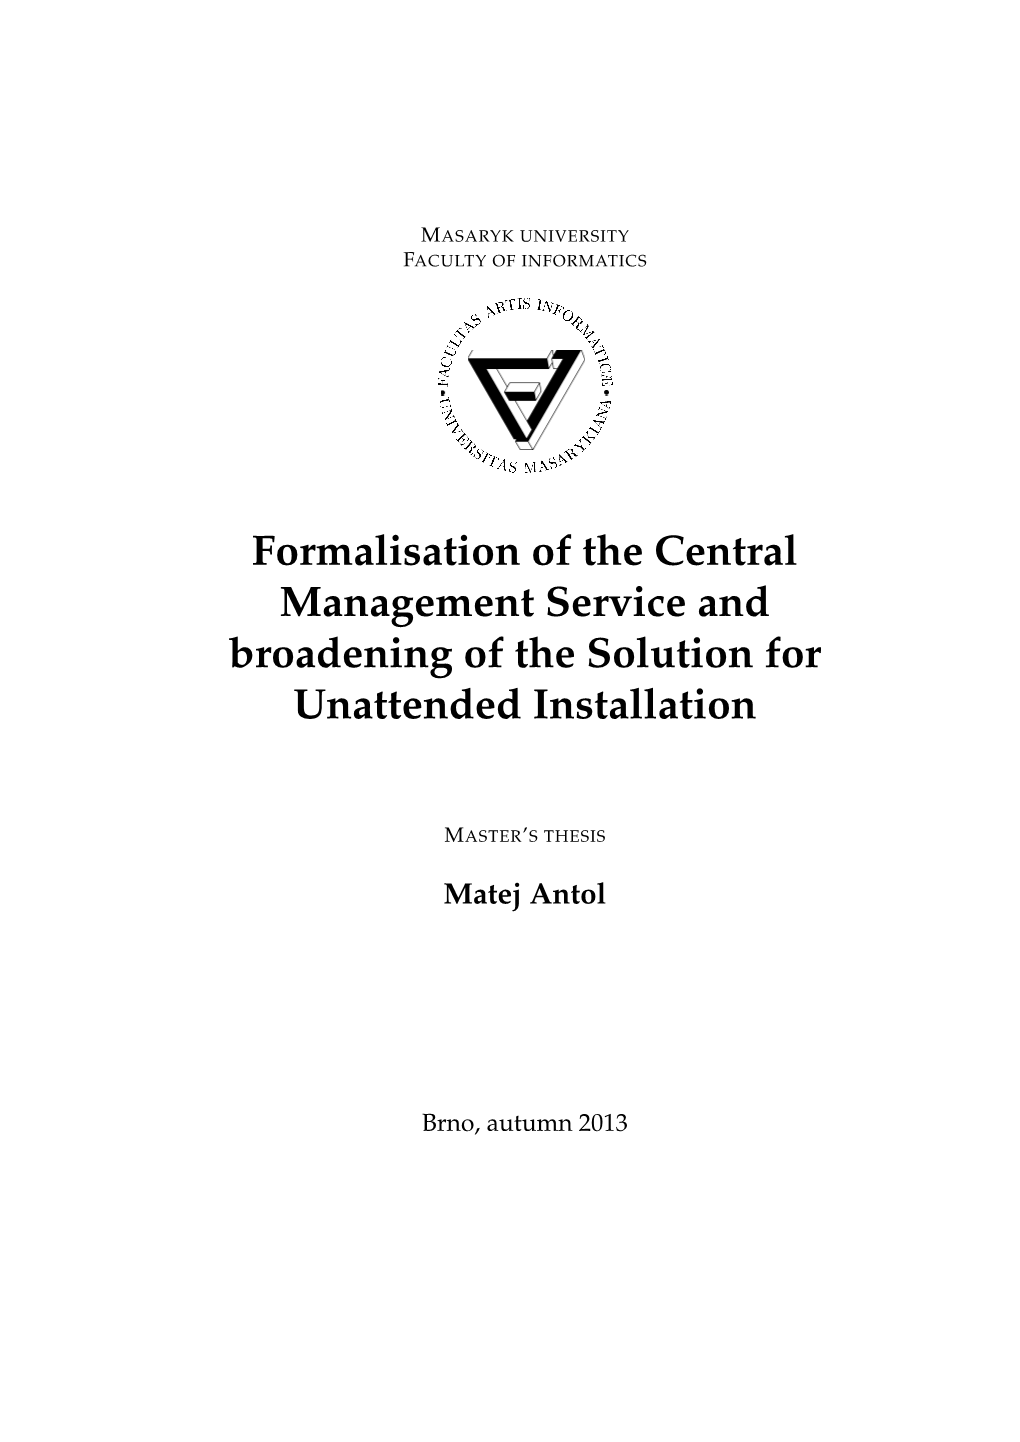 Formalisation of the Central Management Service and Broadening of the Solution for Unattended Installation